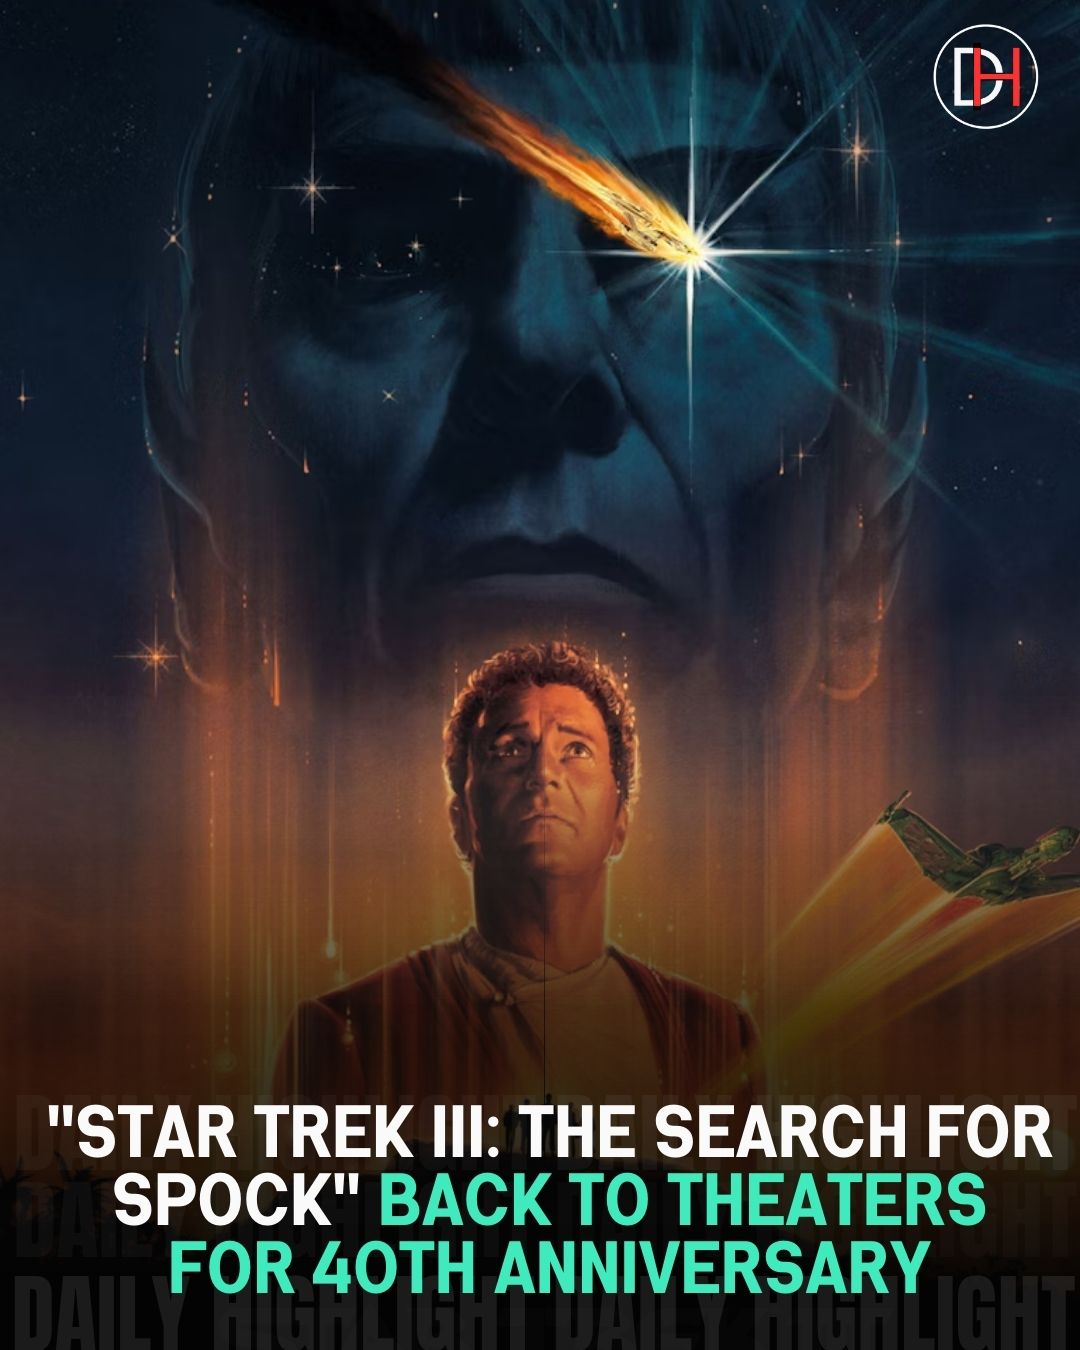 &Quot;Star Trek Iii: The Search For Spock&Quot; Returns To Theaters For 40Th Anniversary